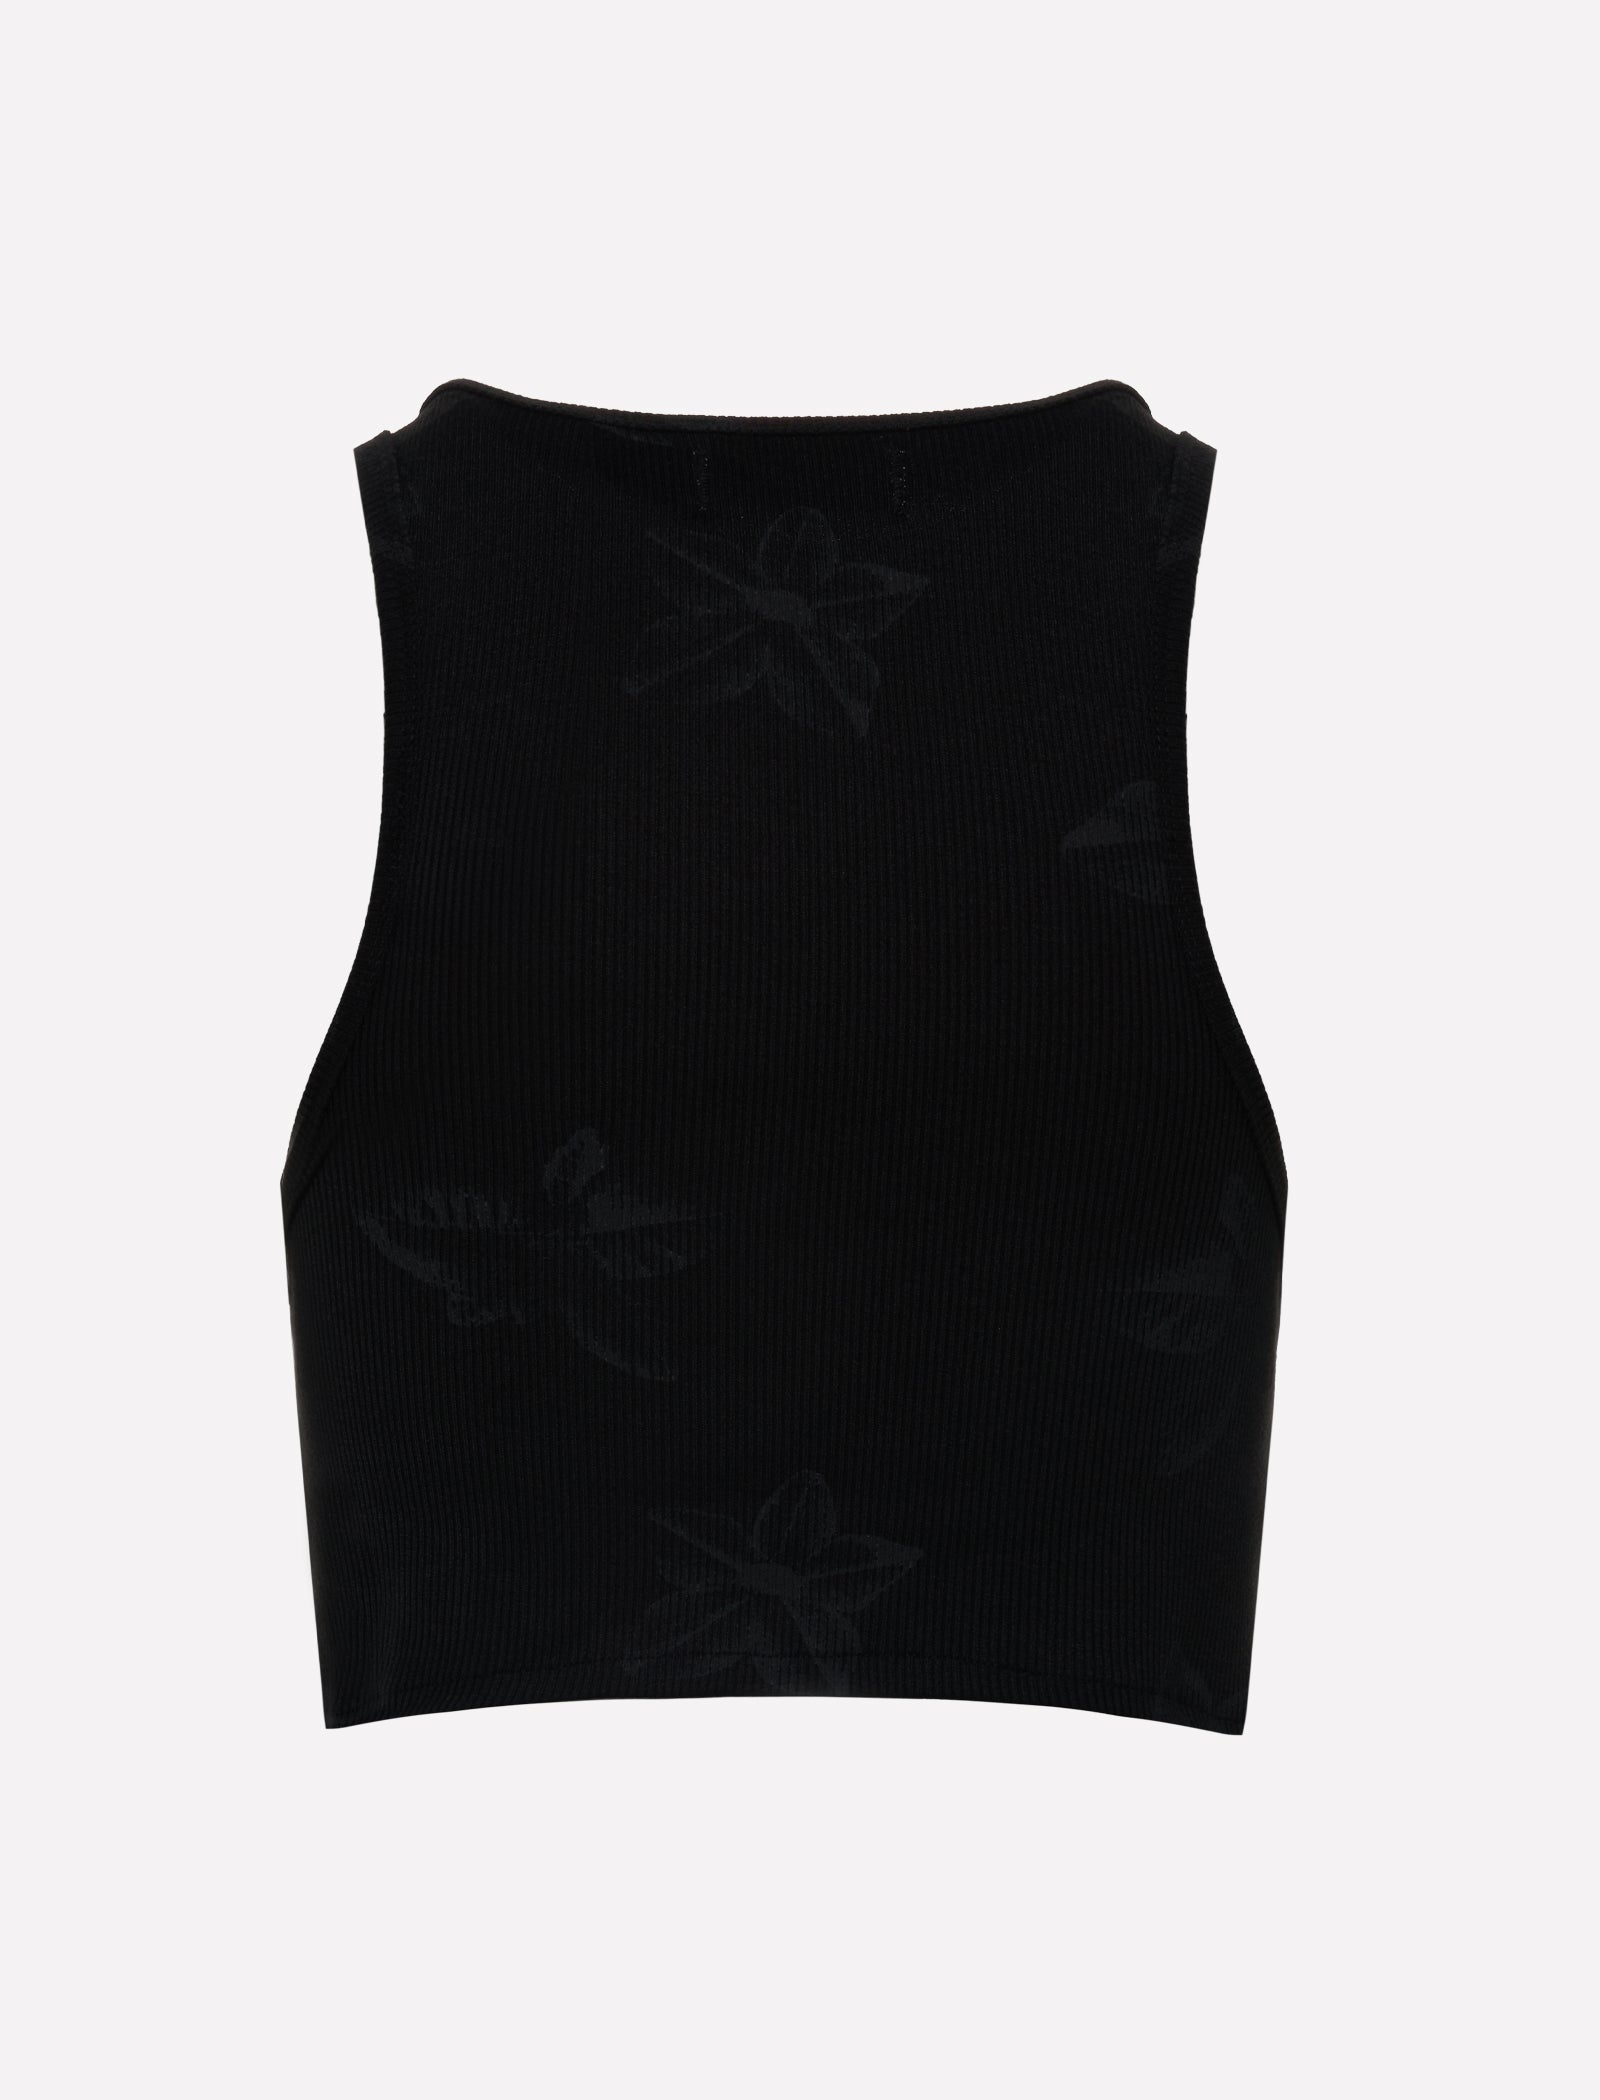 HONOR THE GIFT WOMEN'S FLORAL RIBBED TANK